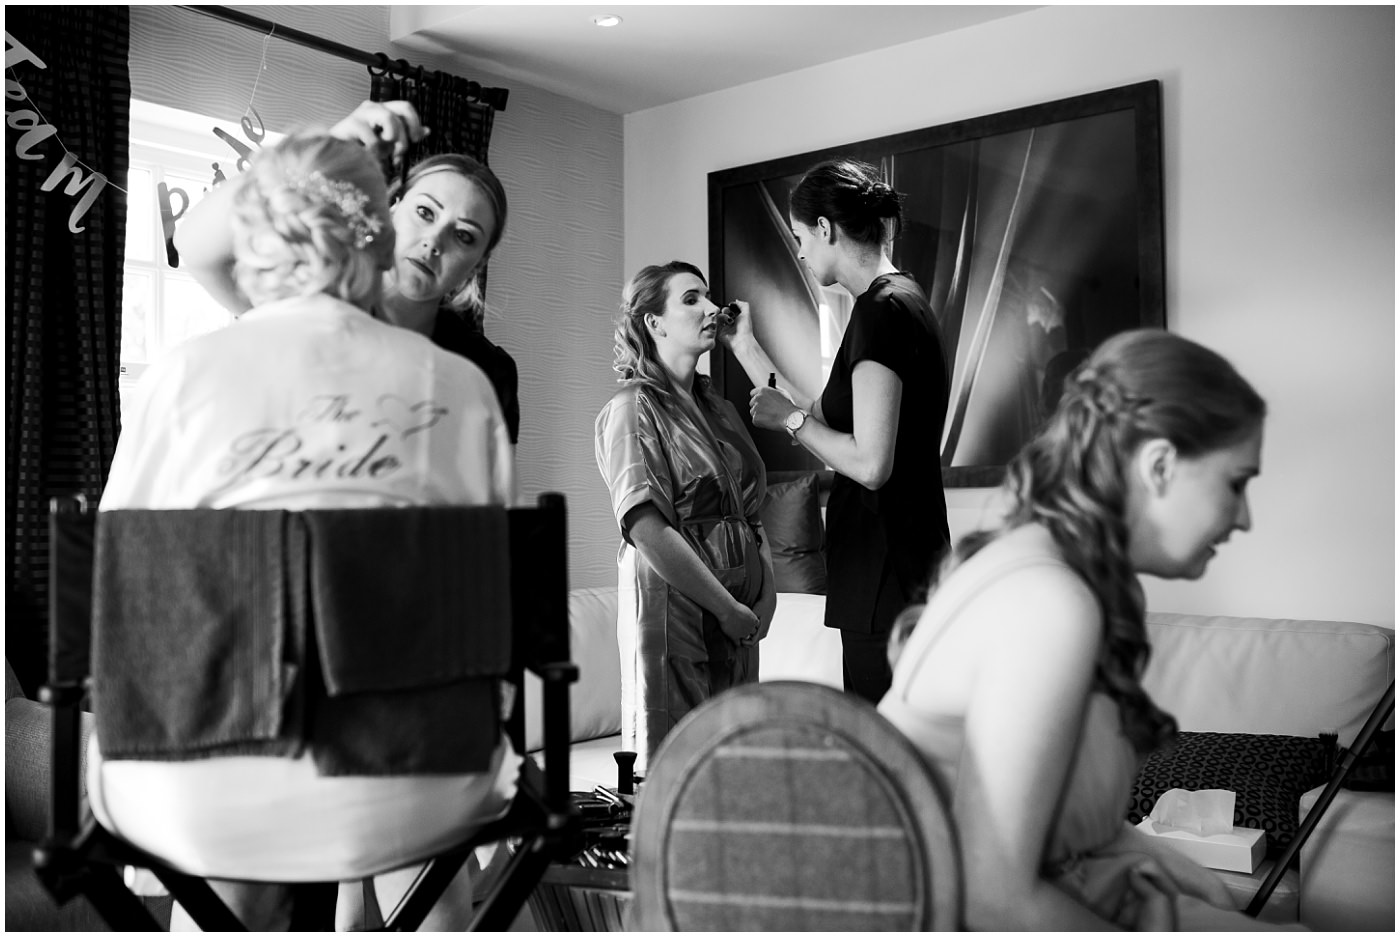 busy bridal prep scene with multiple bridesmaids getting ready